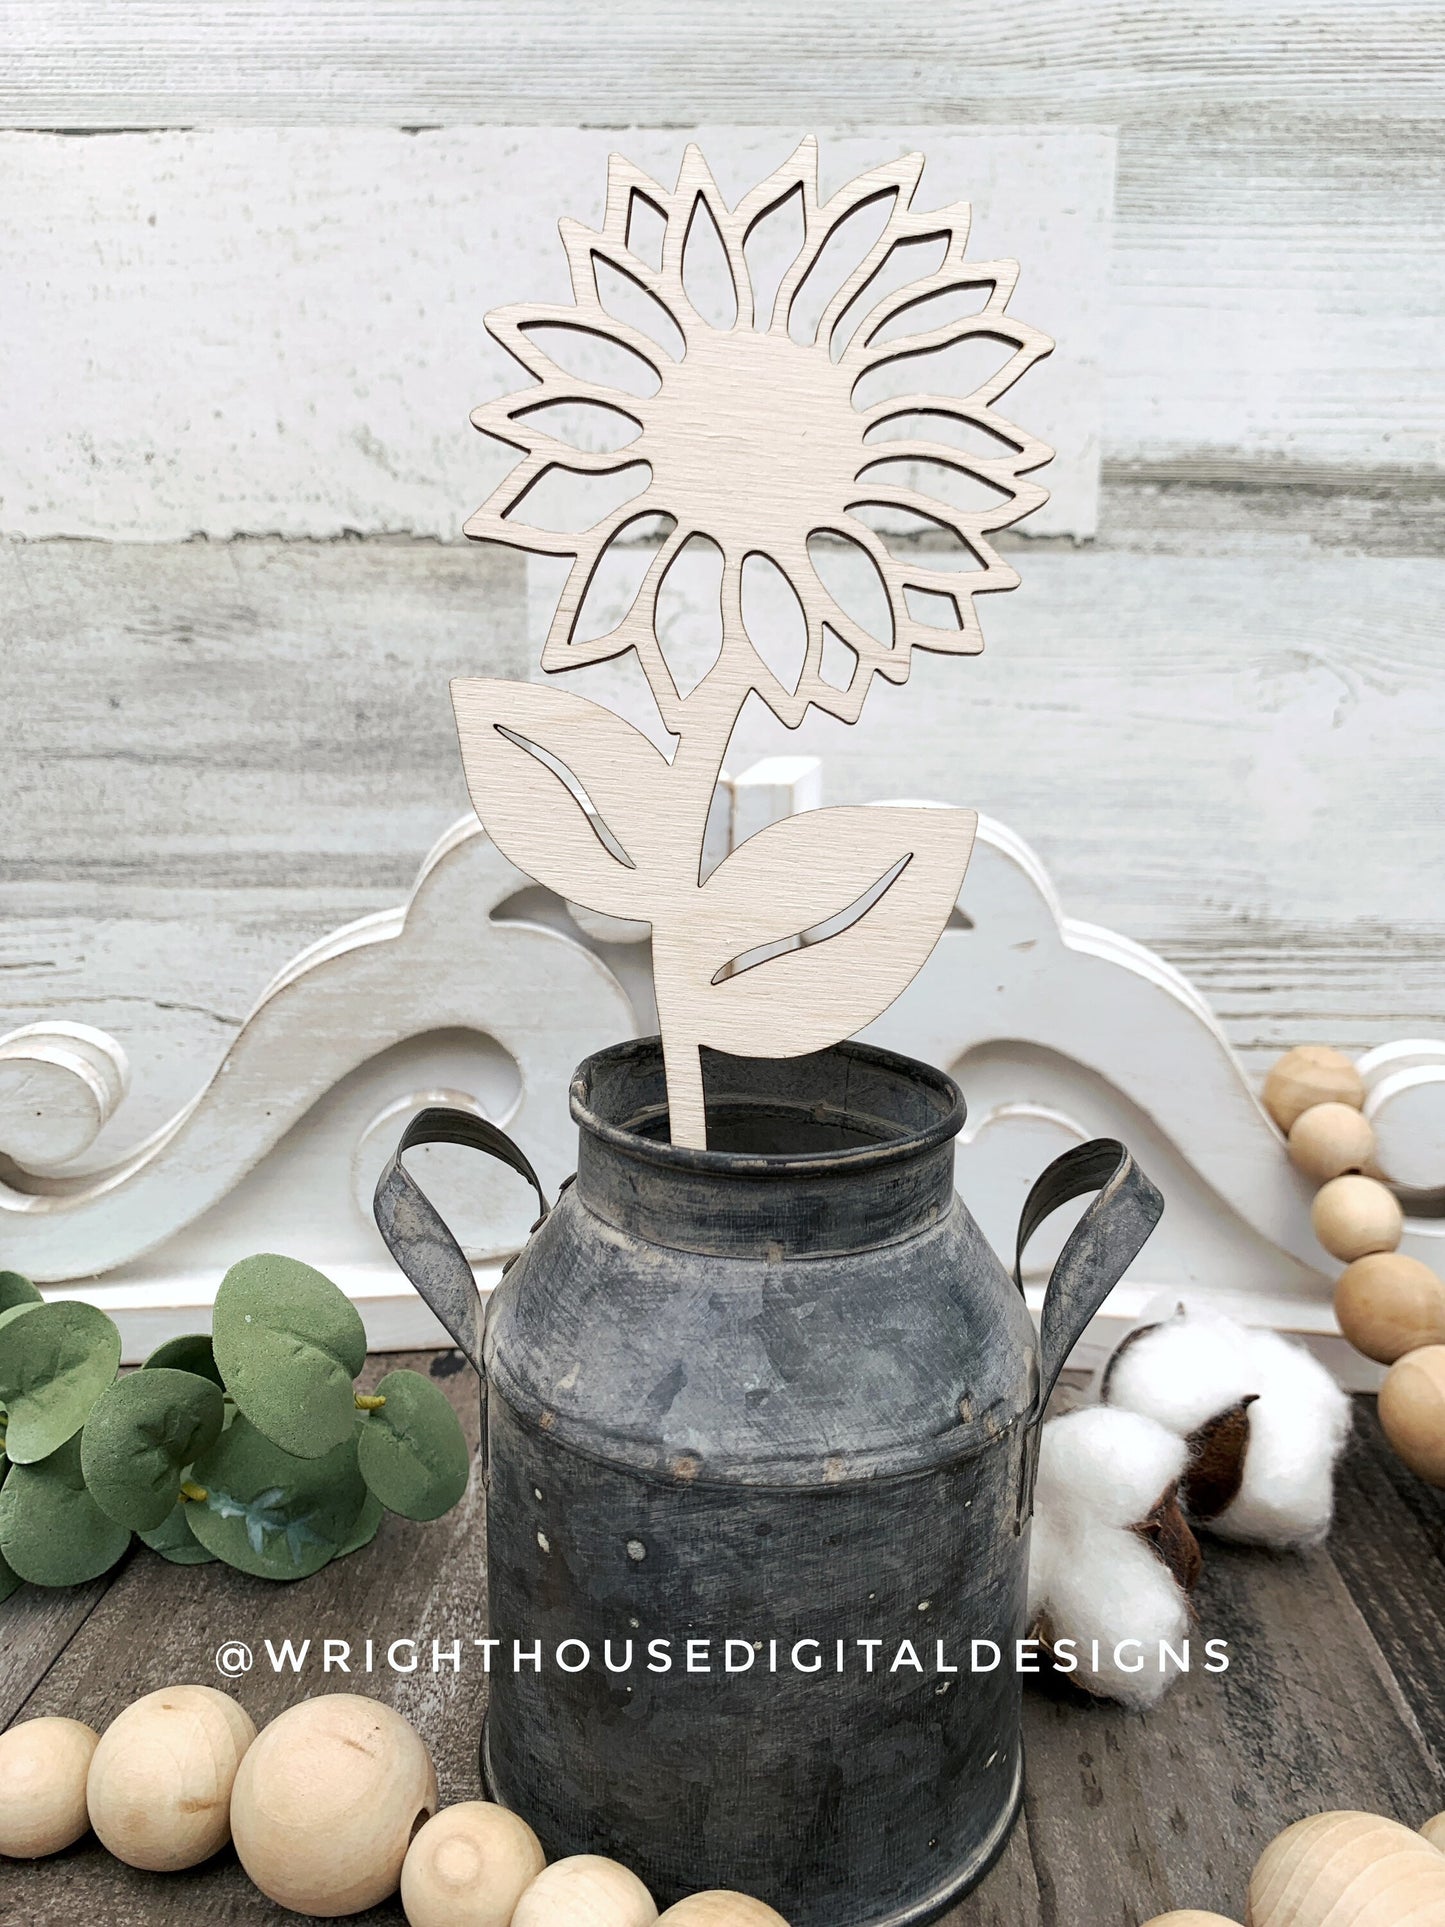 Sunflower Wooden Laser Cut Flowers - Simple Diy Florals For Bouquets - Files for Sign Making - SVG Cut File For Glowforge - Digital File